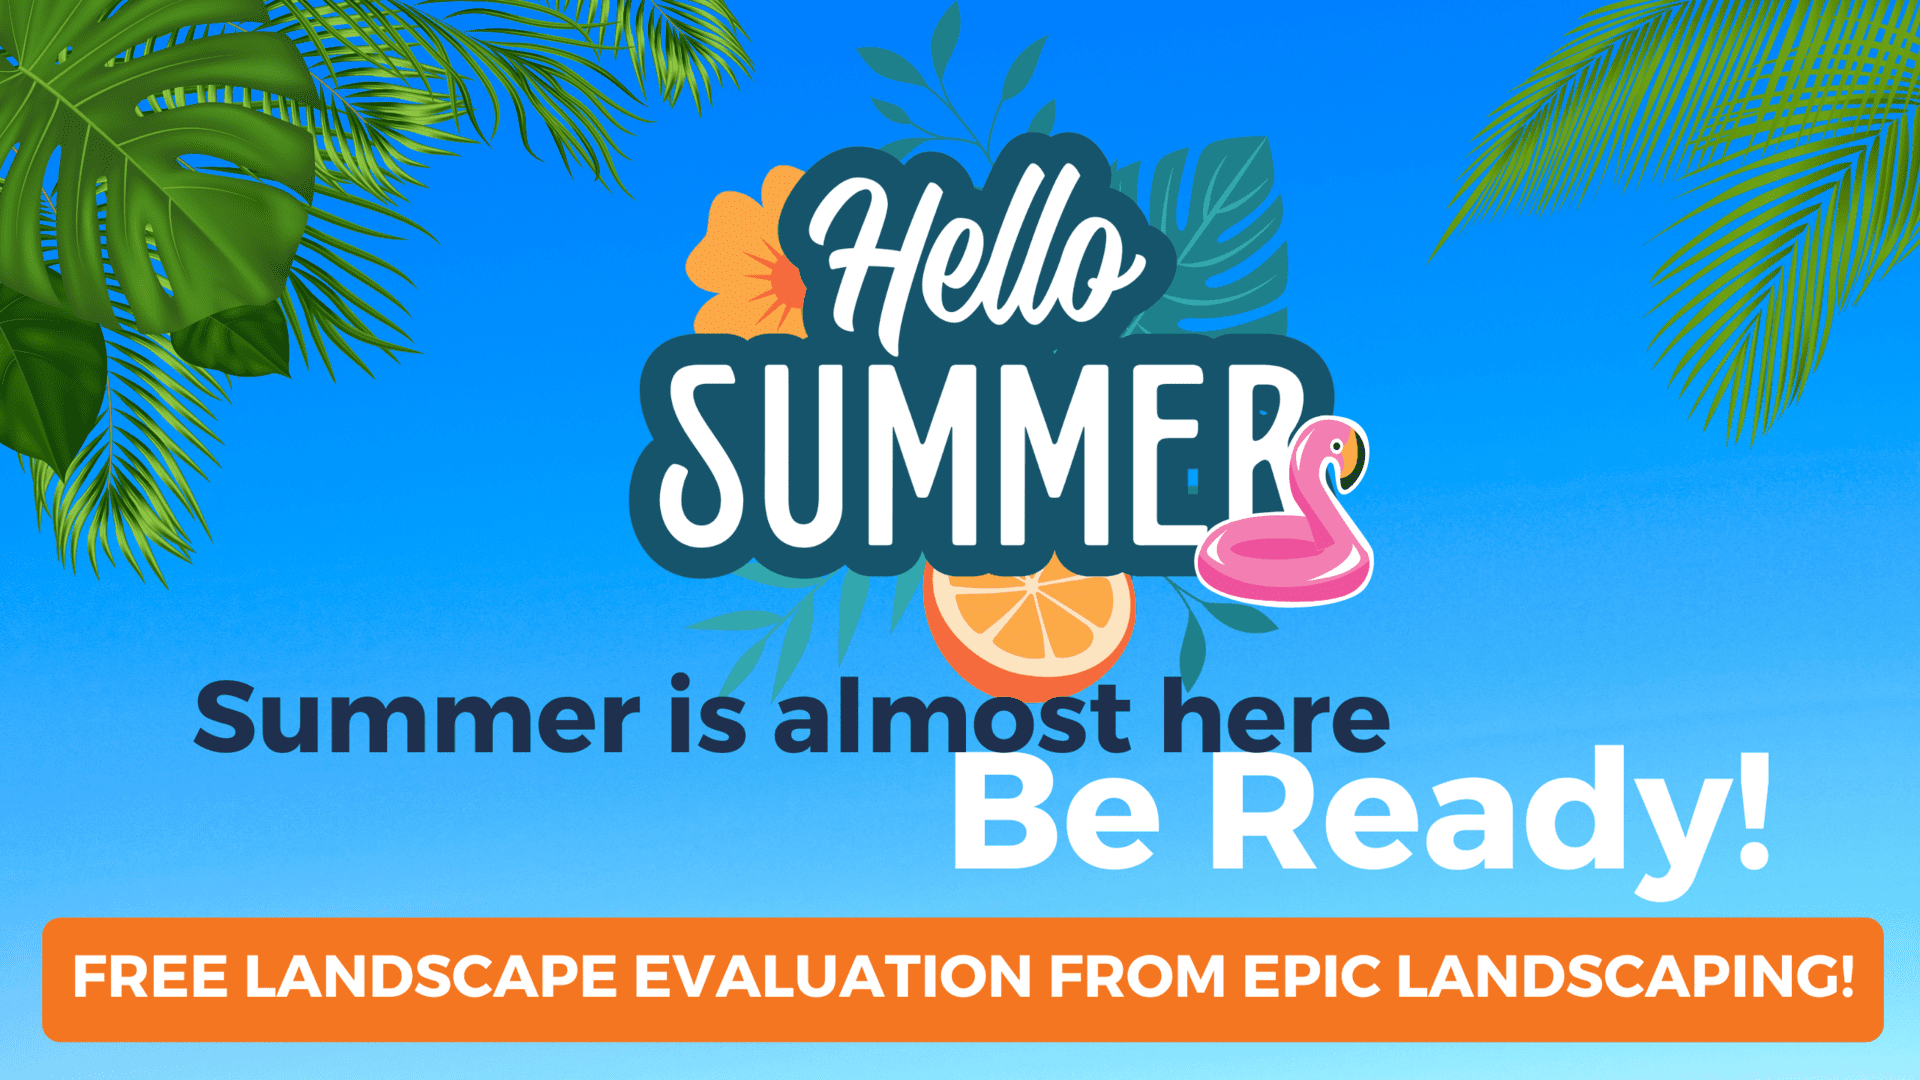 Hello Summer. Summer is almost here. Be ready! Free landscape evaluation from EPIC Landscaping!